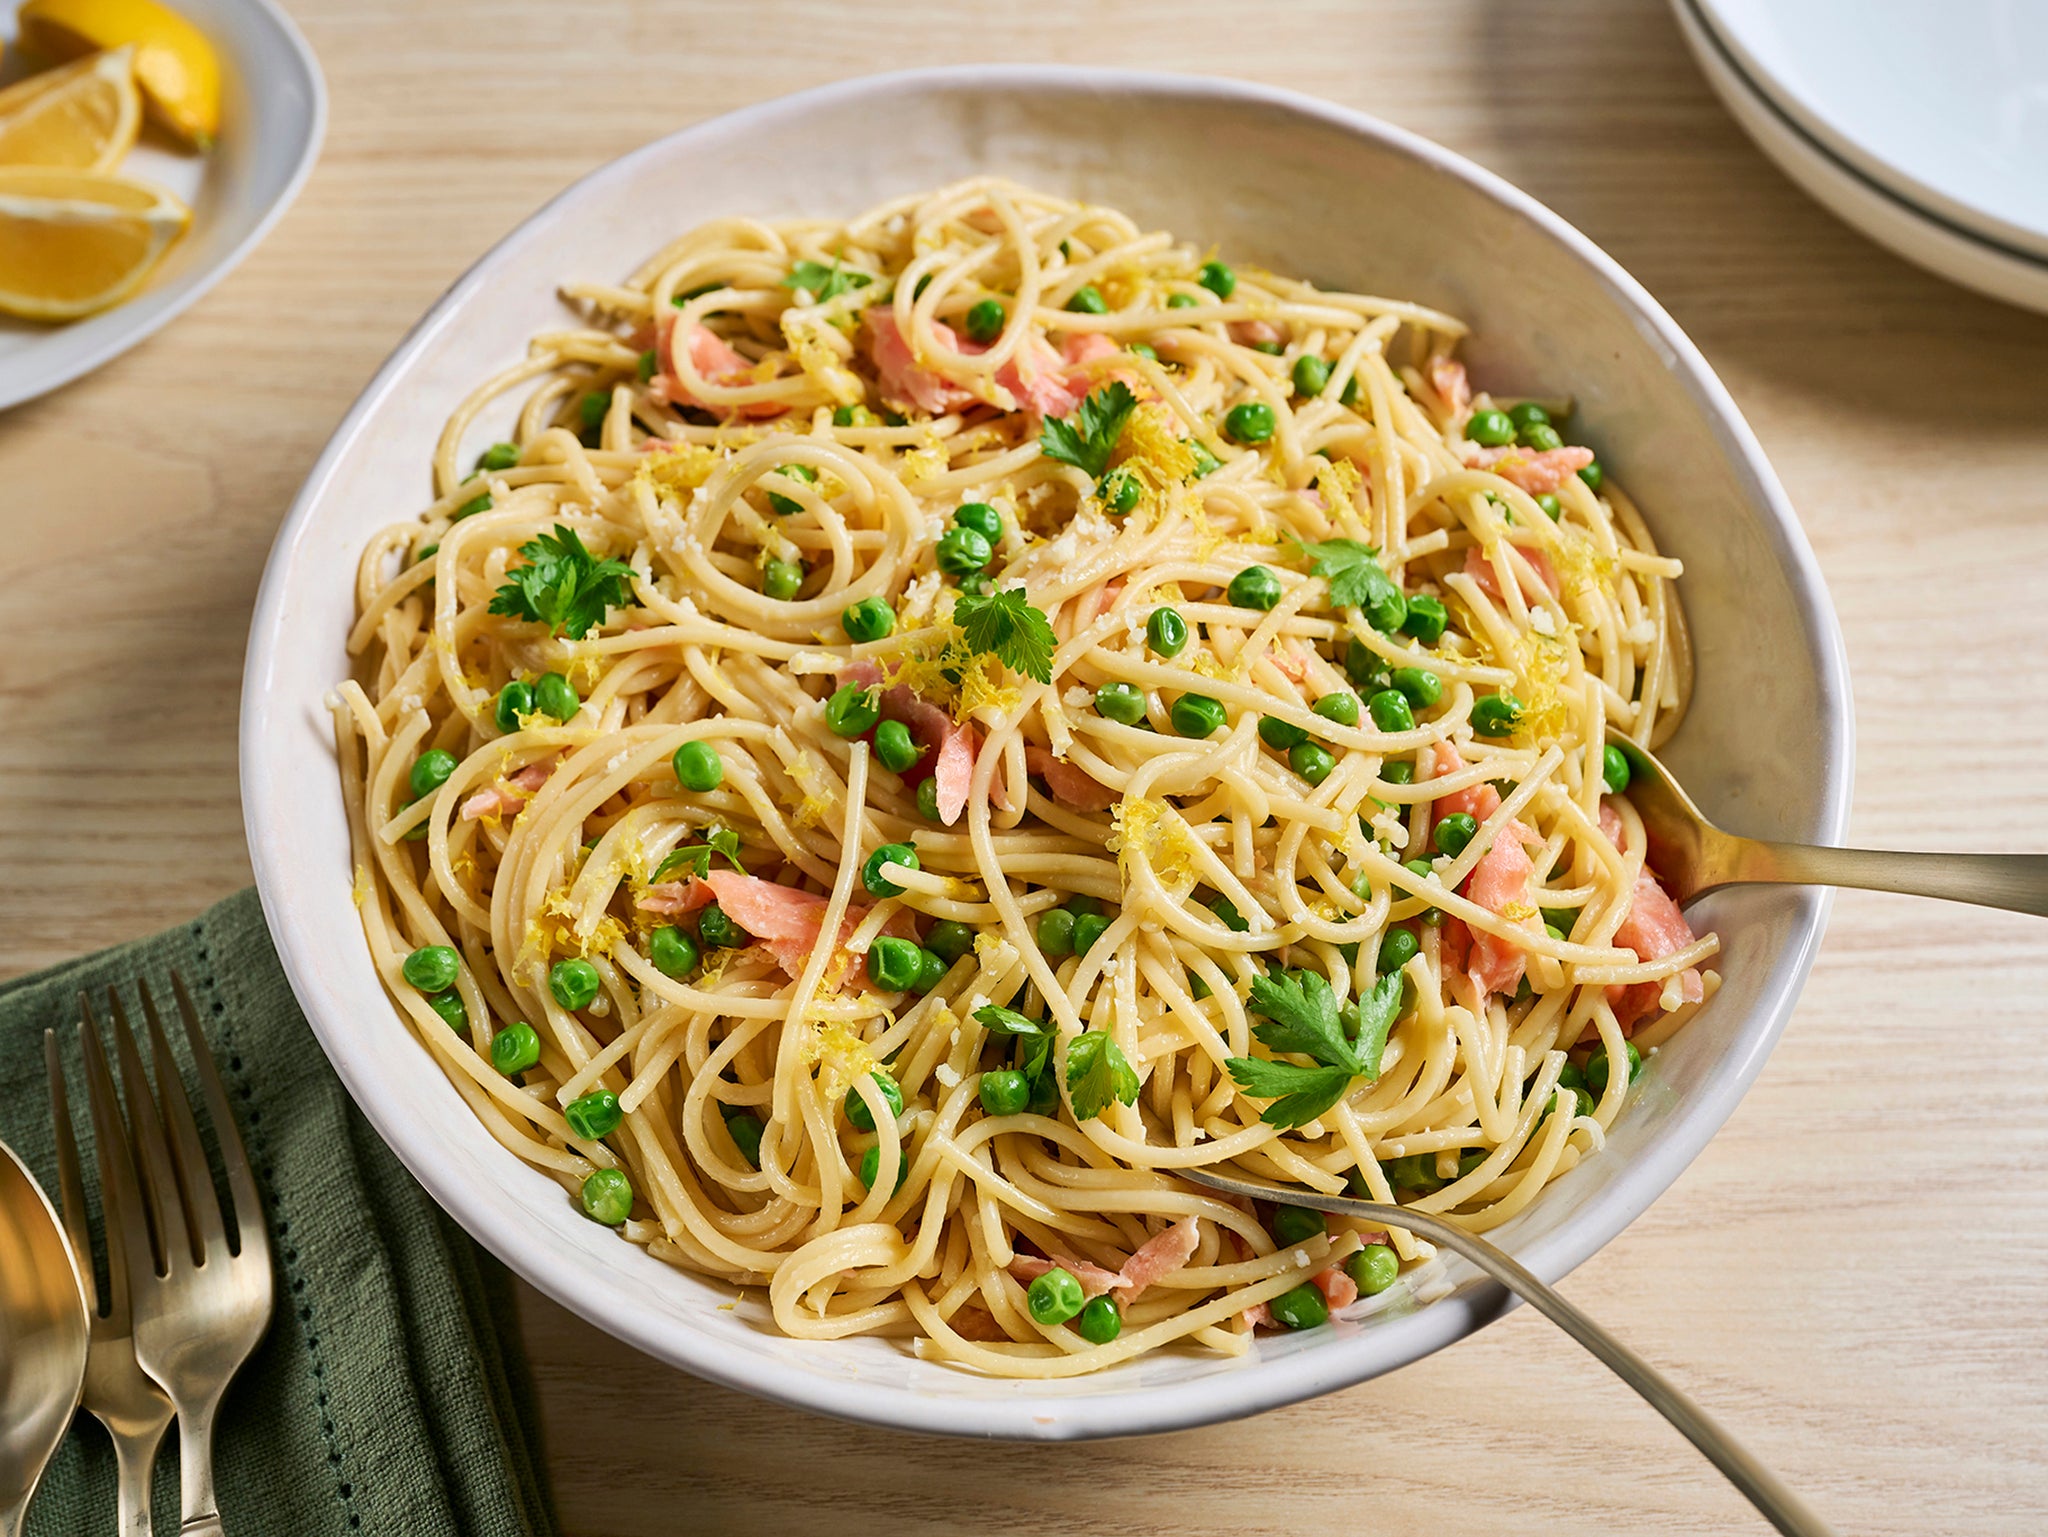 Pasta recipe with lemon, smoked salmon and peas | The Independent